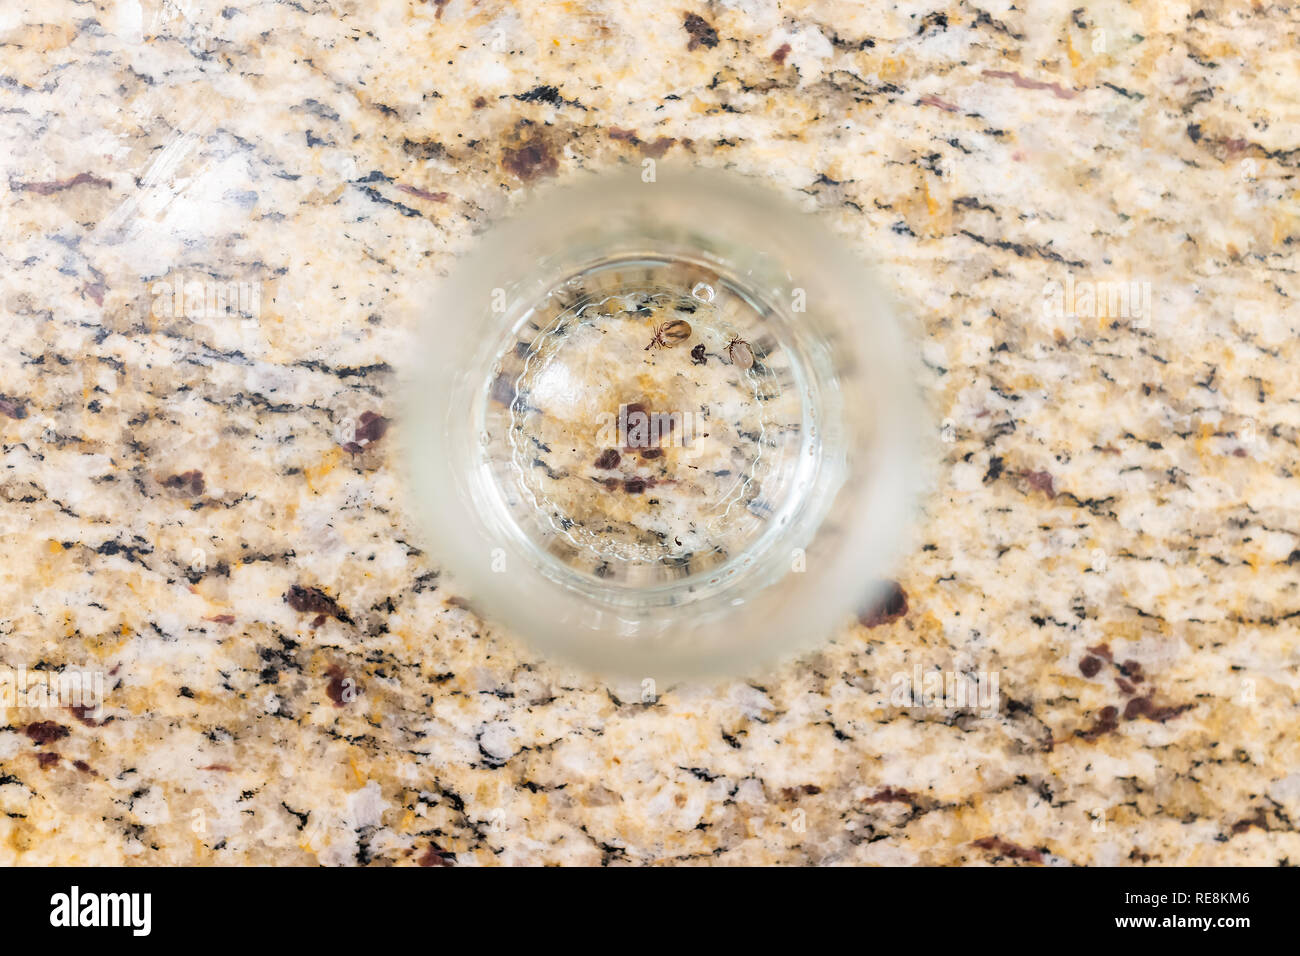 Macro flat top closeup of two large lone star ticks in glass jar cup engorged with blood on granite countertop table counter Stock Photo